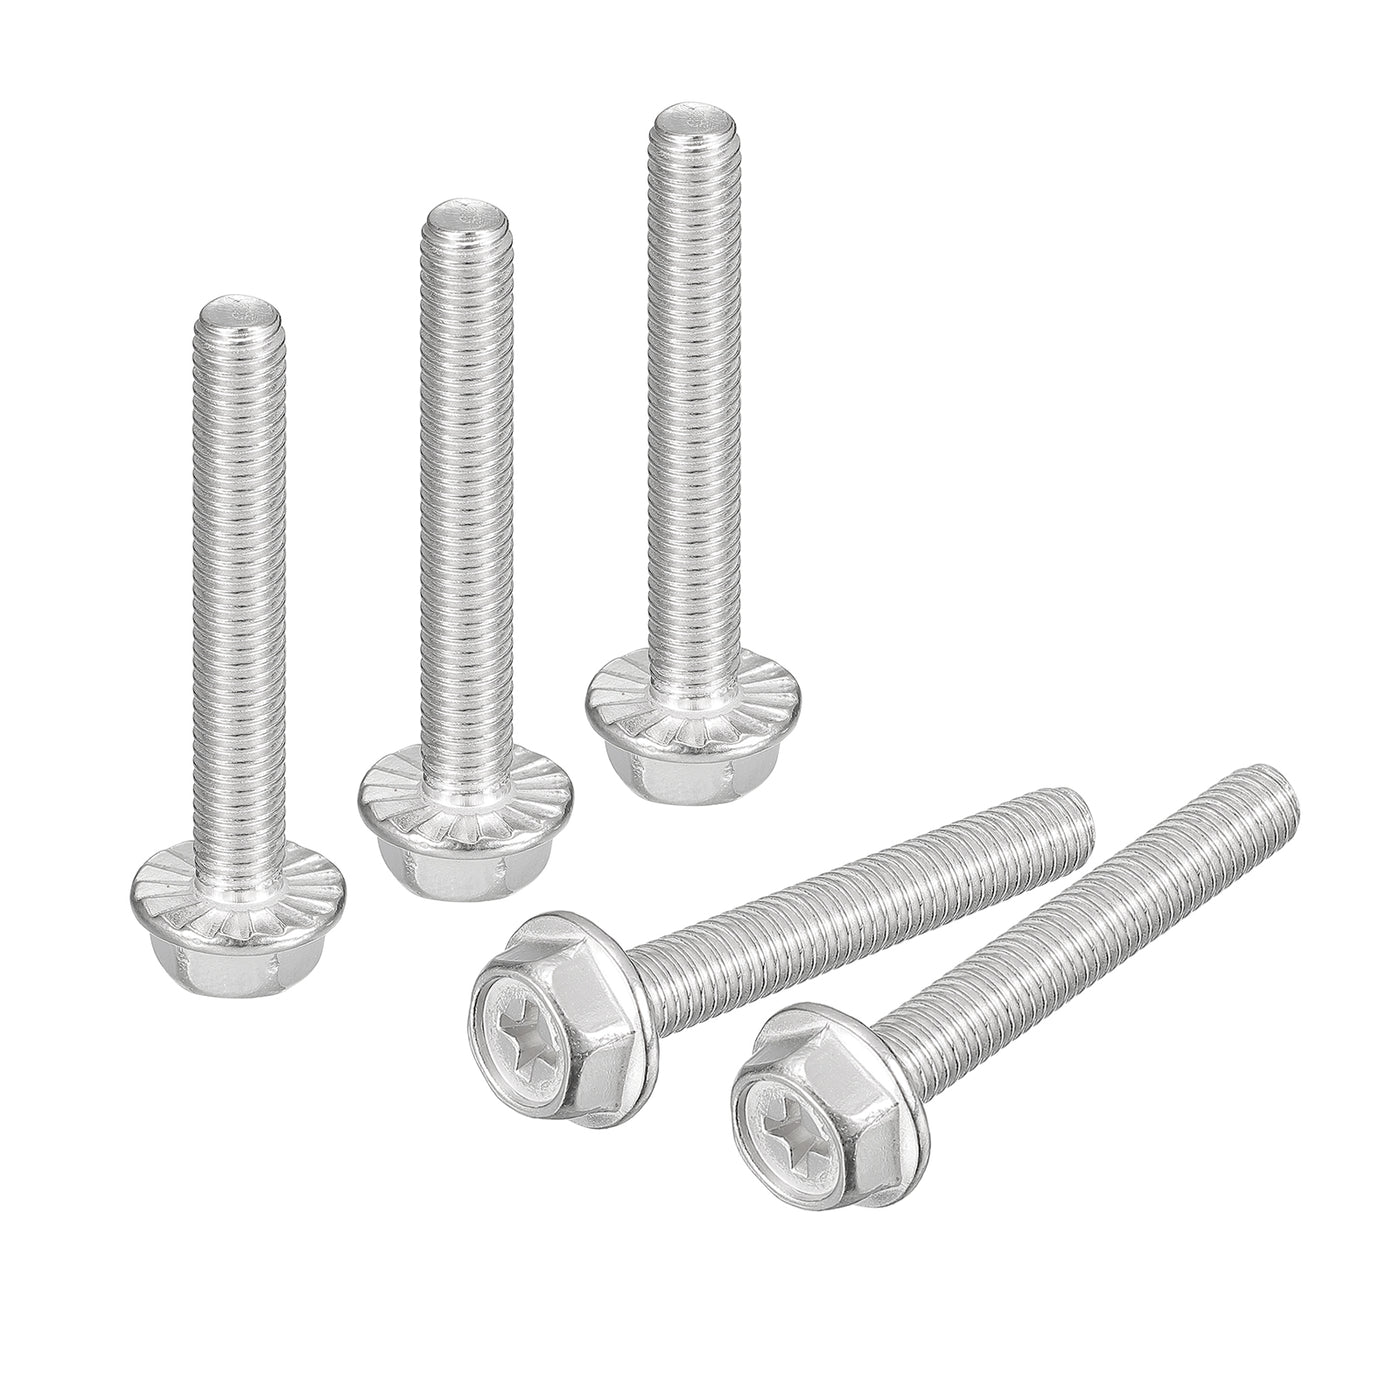 uxcell Uxcell M6x40mm Phillips Hex Head Flange Bolts, 10pcs 304 Stainless Steel Screws